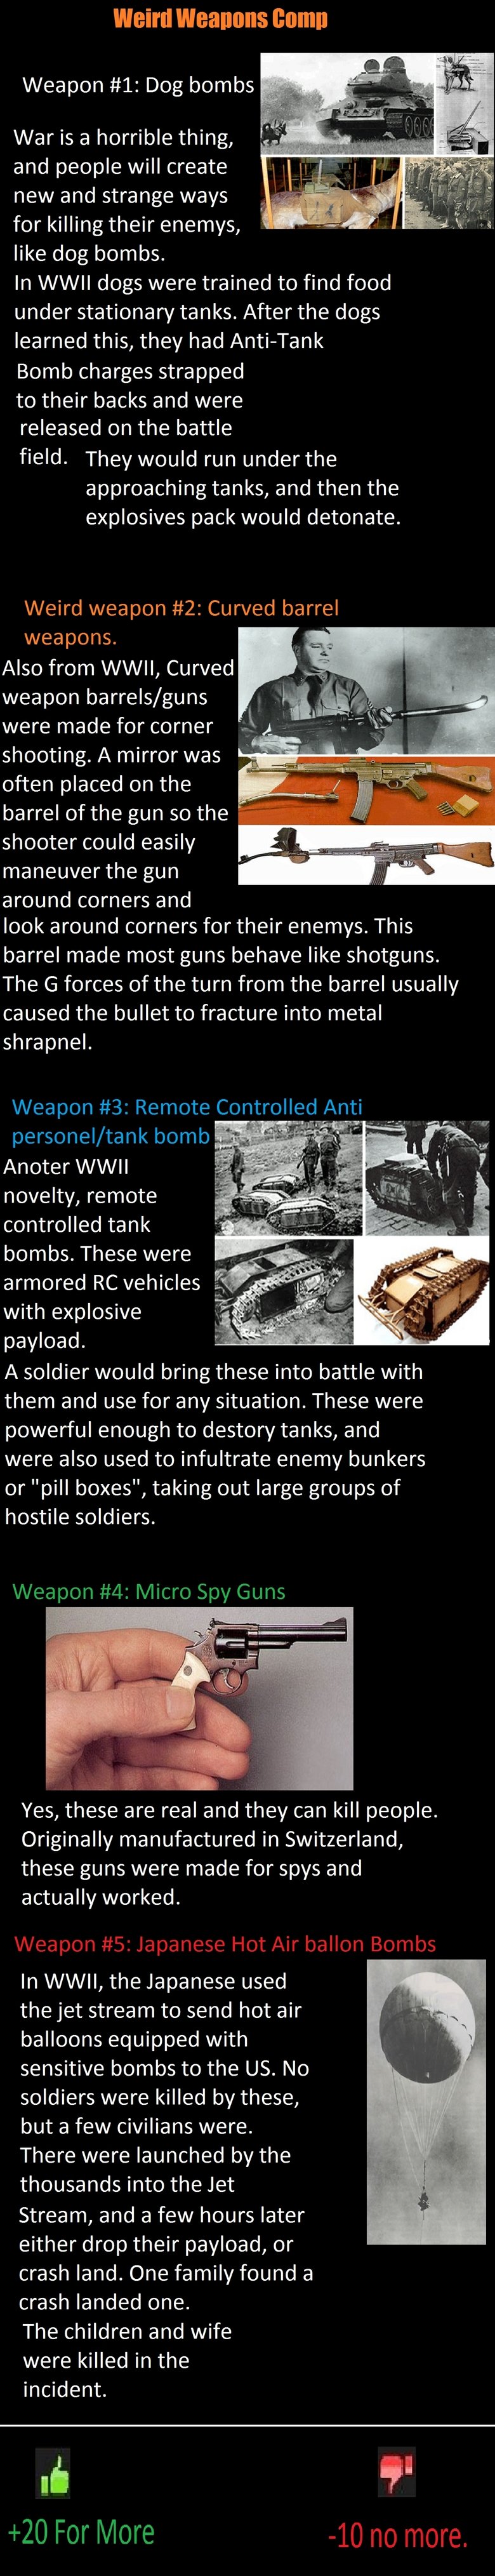 Weird Weapons Comp. Please rate and comment. Contentdump.. the remote controlled goliath anti-tank device was genius just dig like a 3 foot x 3 foot hole cover it with camoflage, then sit a couple hundred feet back and 